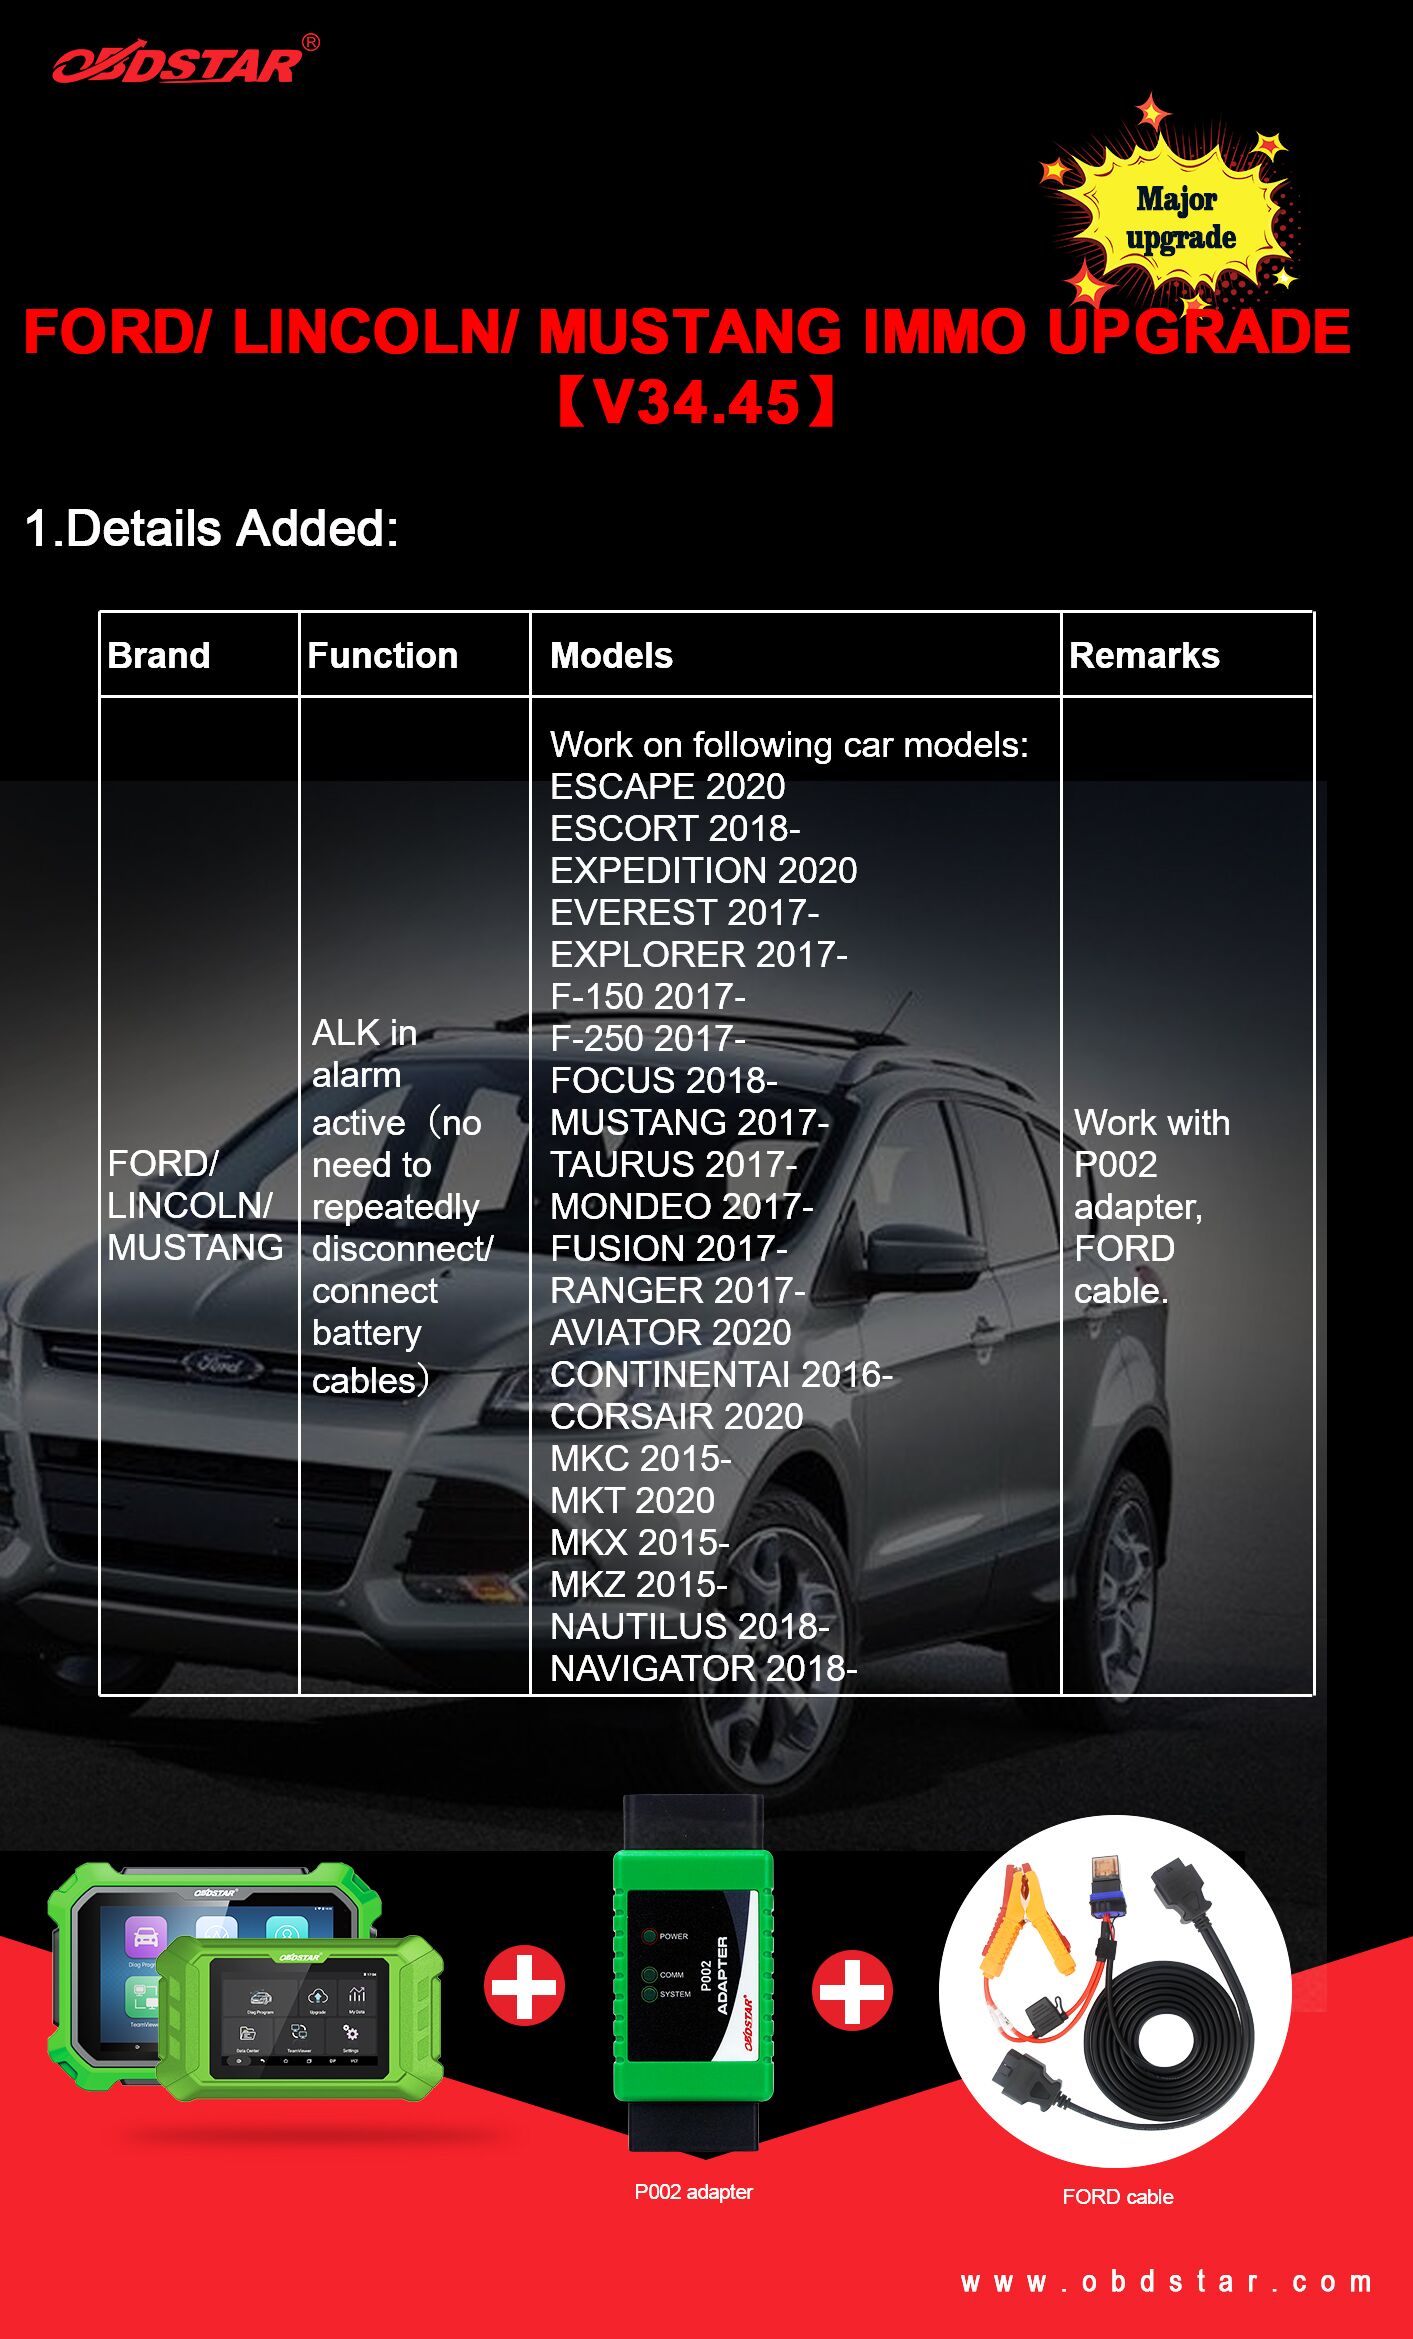 FORD/ LINCOLN/ MUSTANG IMMO UPGRADE V34.45